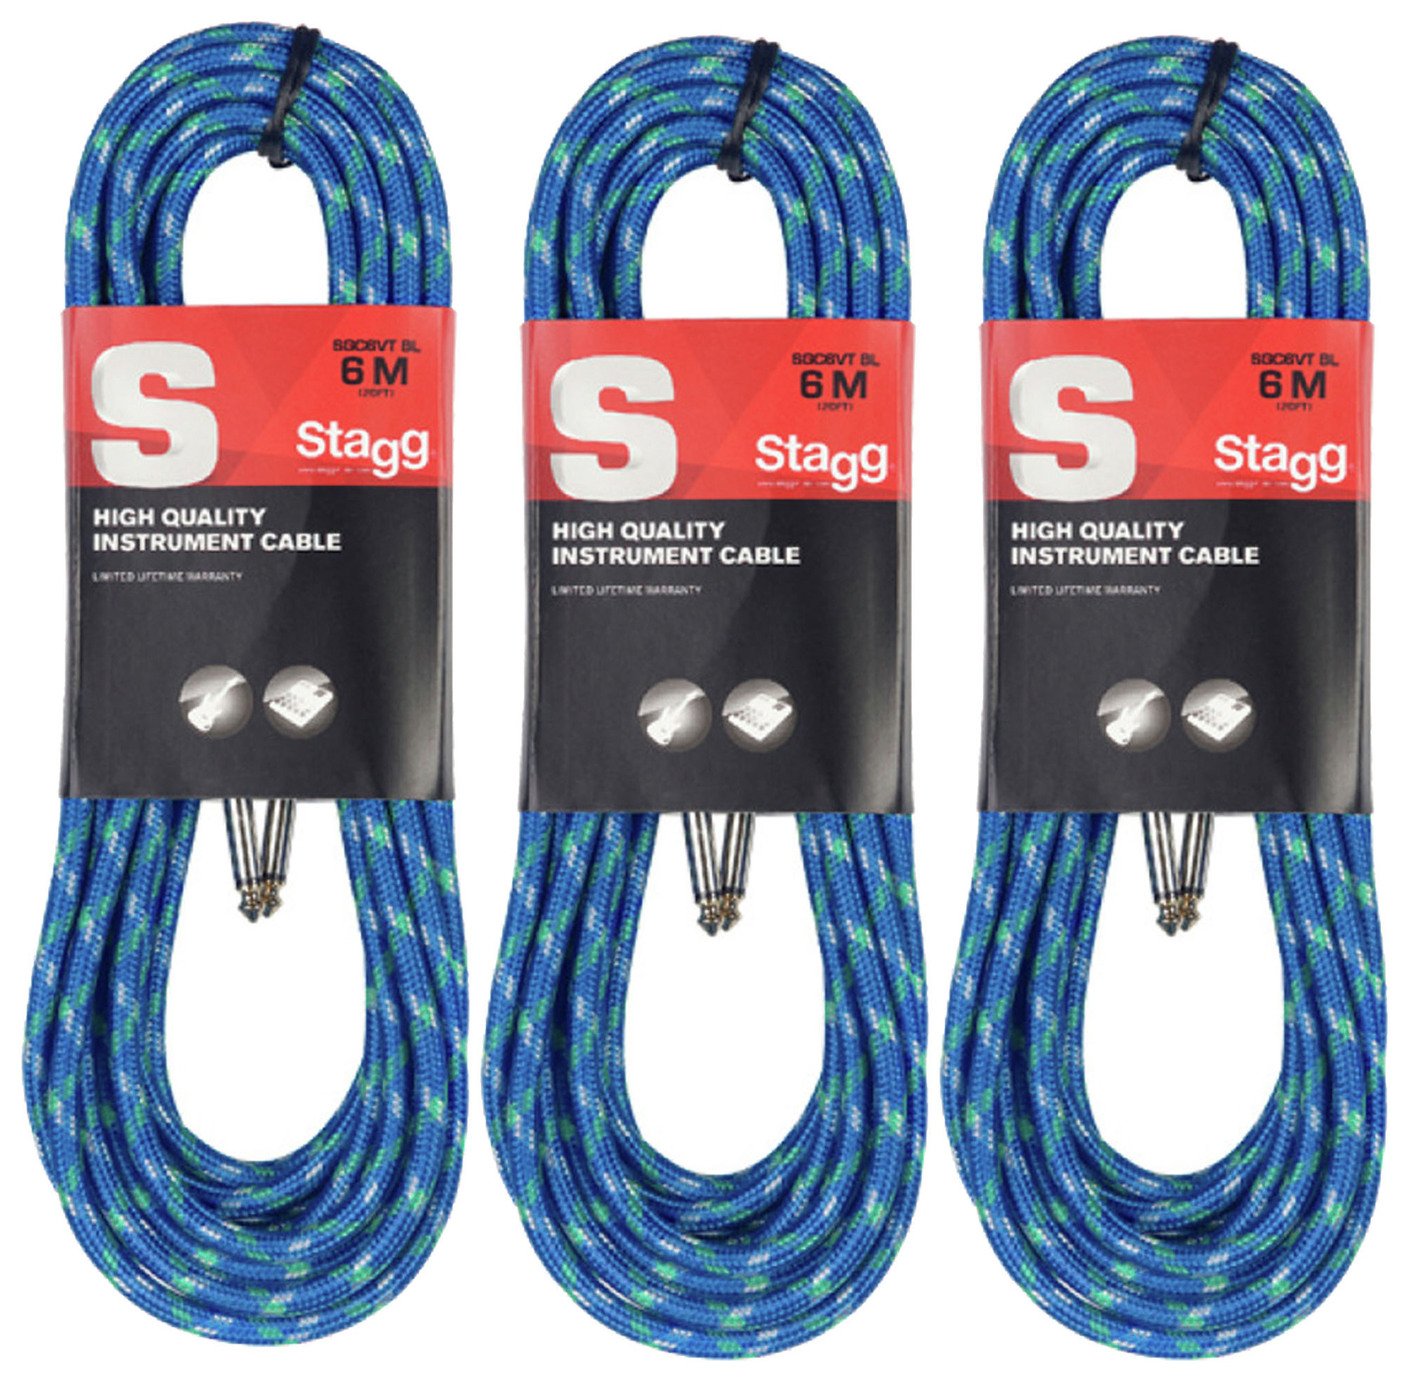 Stagg Tweed Guitar Cable Review